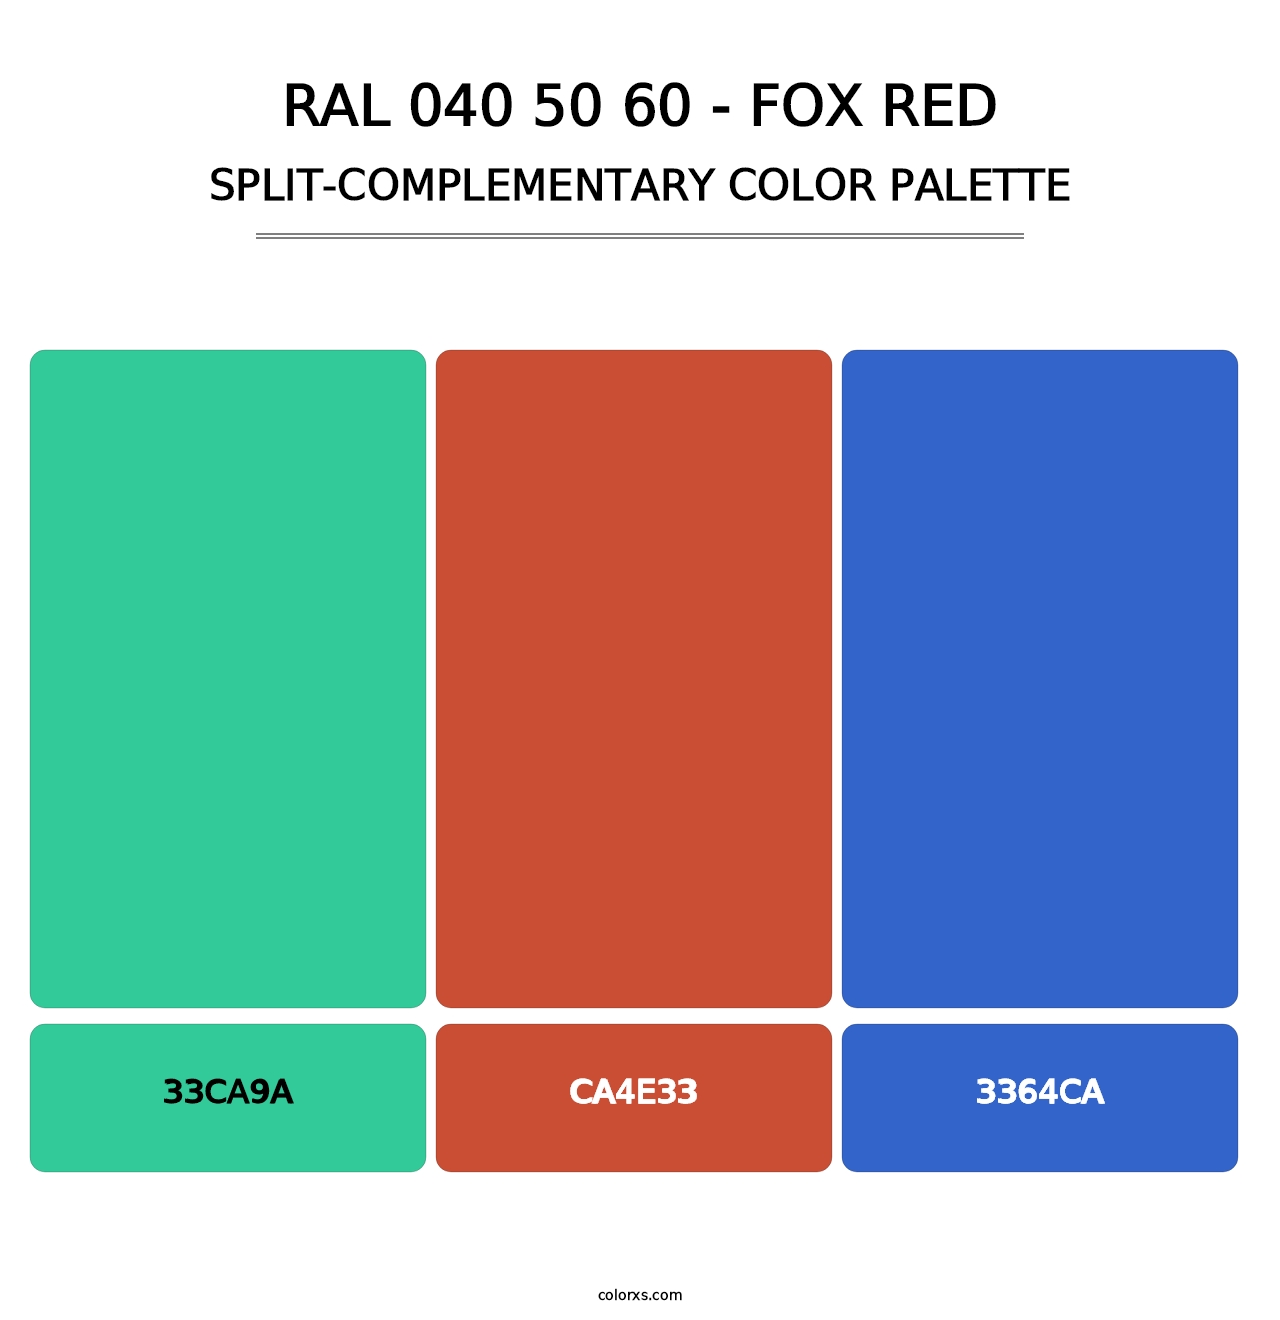 RAL 040 50 60 - Fox Red - Split-Complementary Color Palette